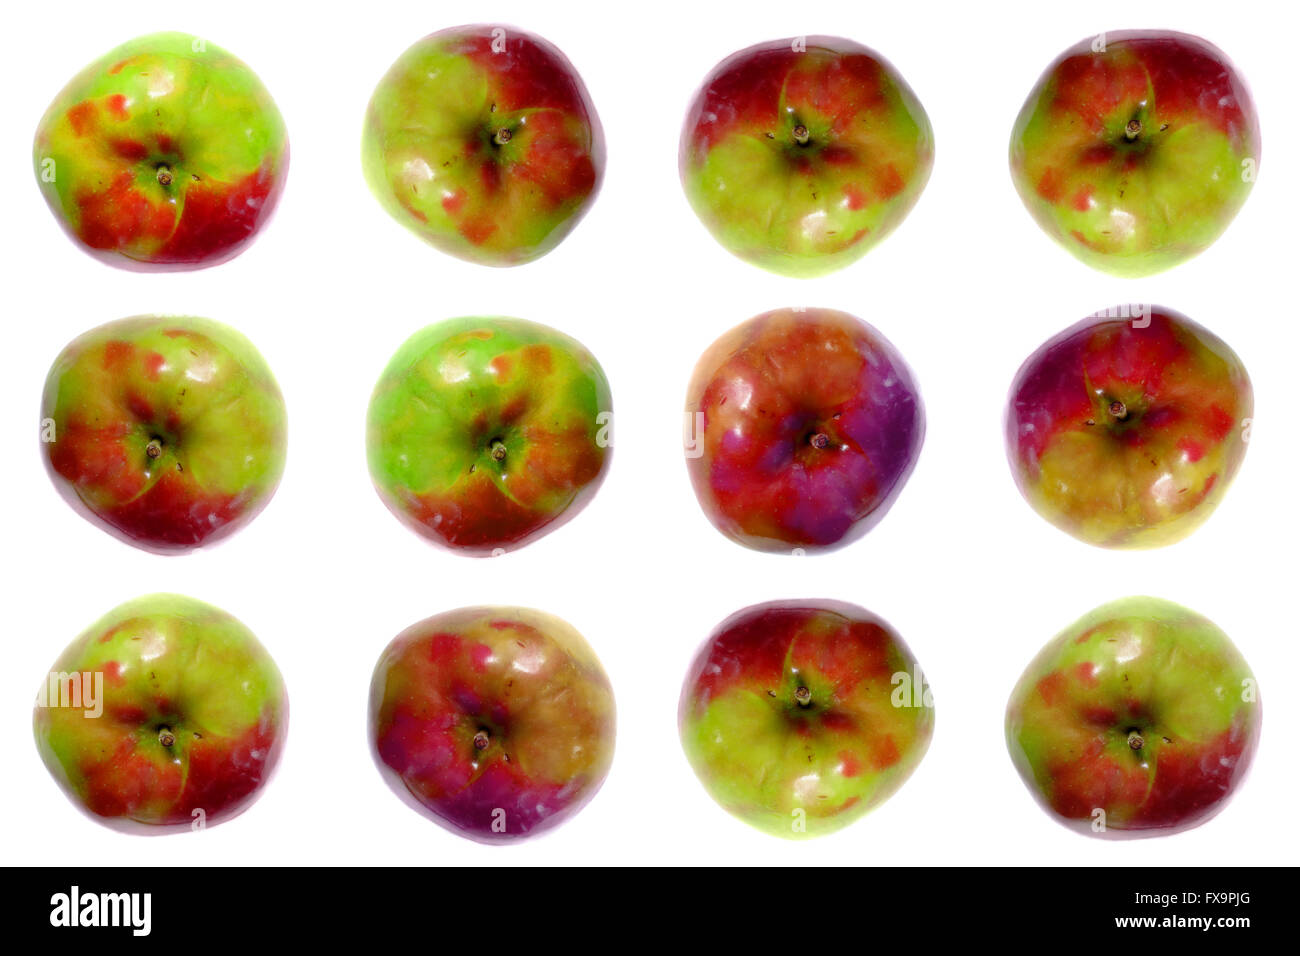 Twelve apples photographed against a white background. Stock Photo